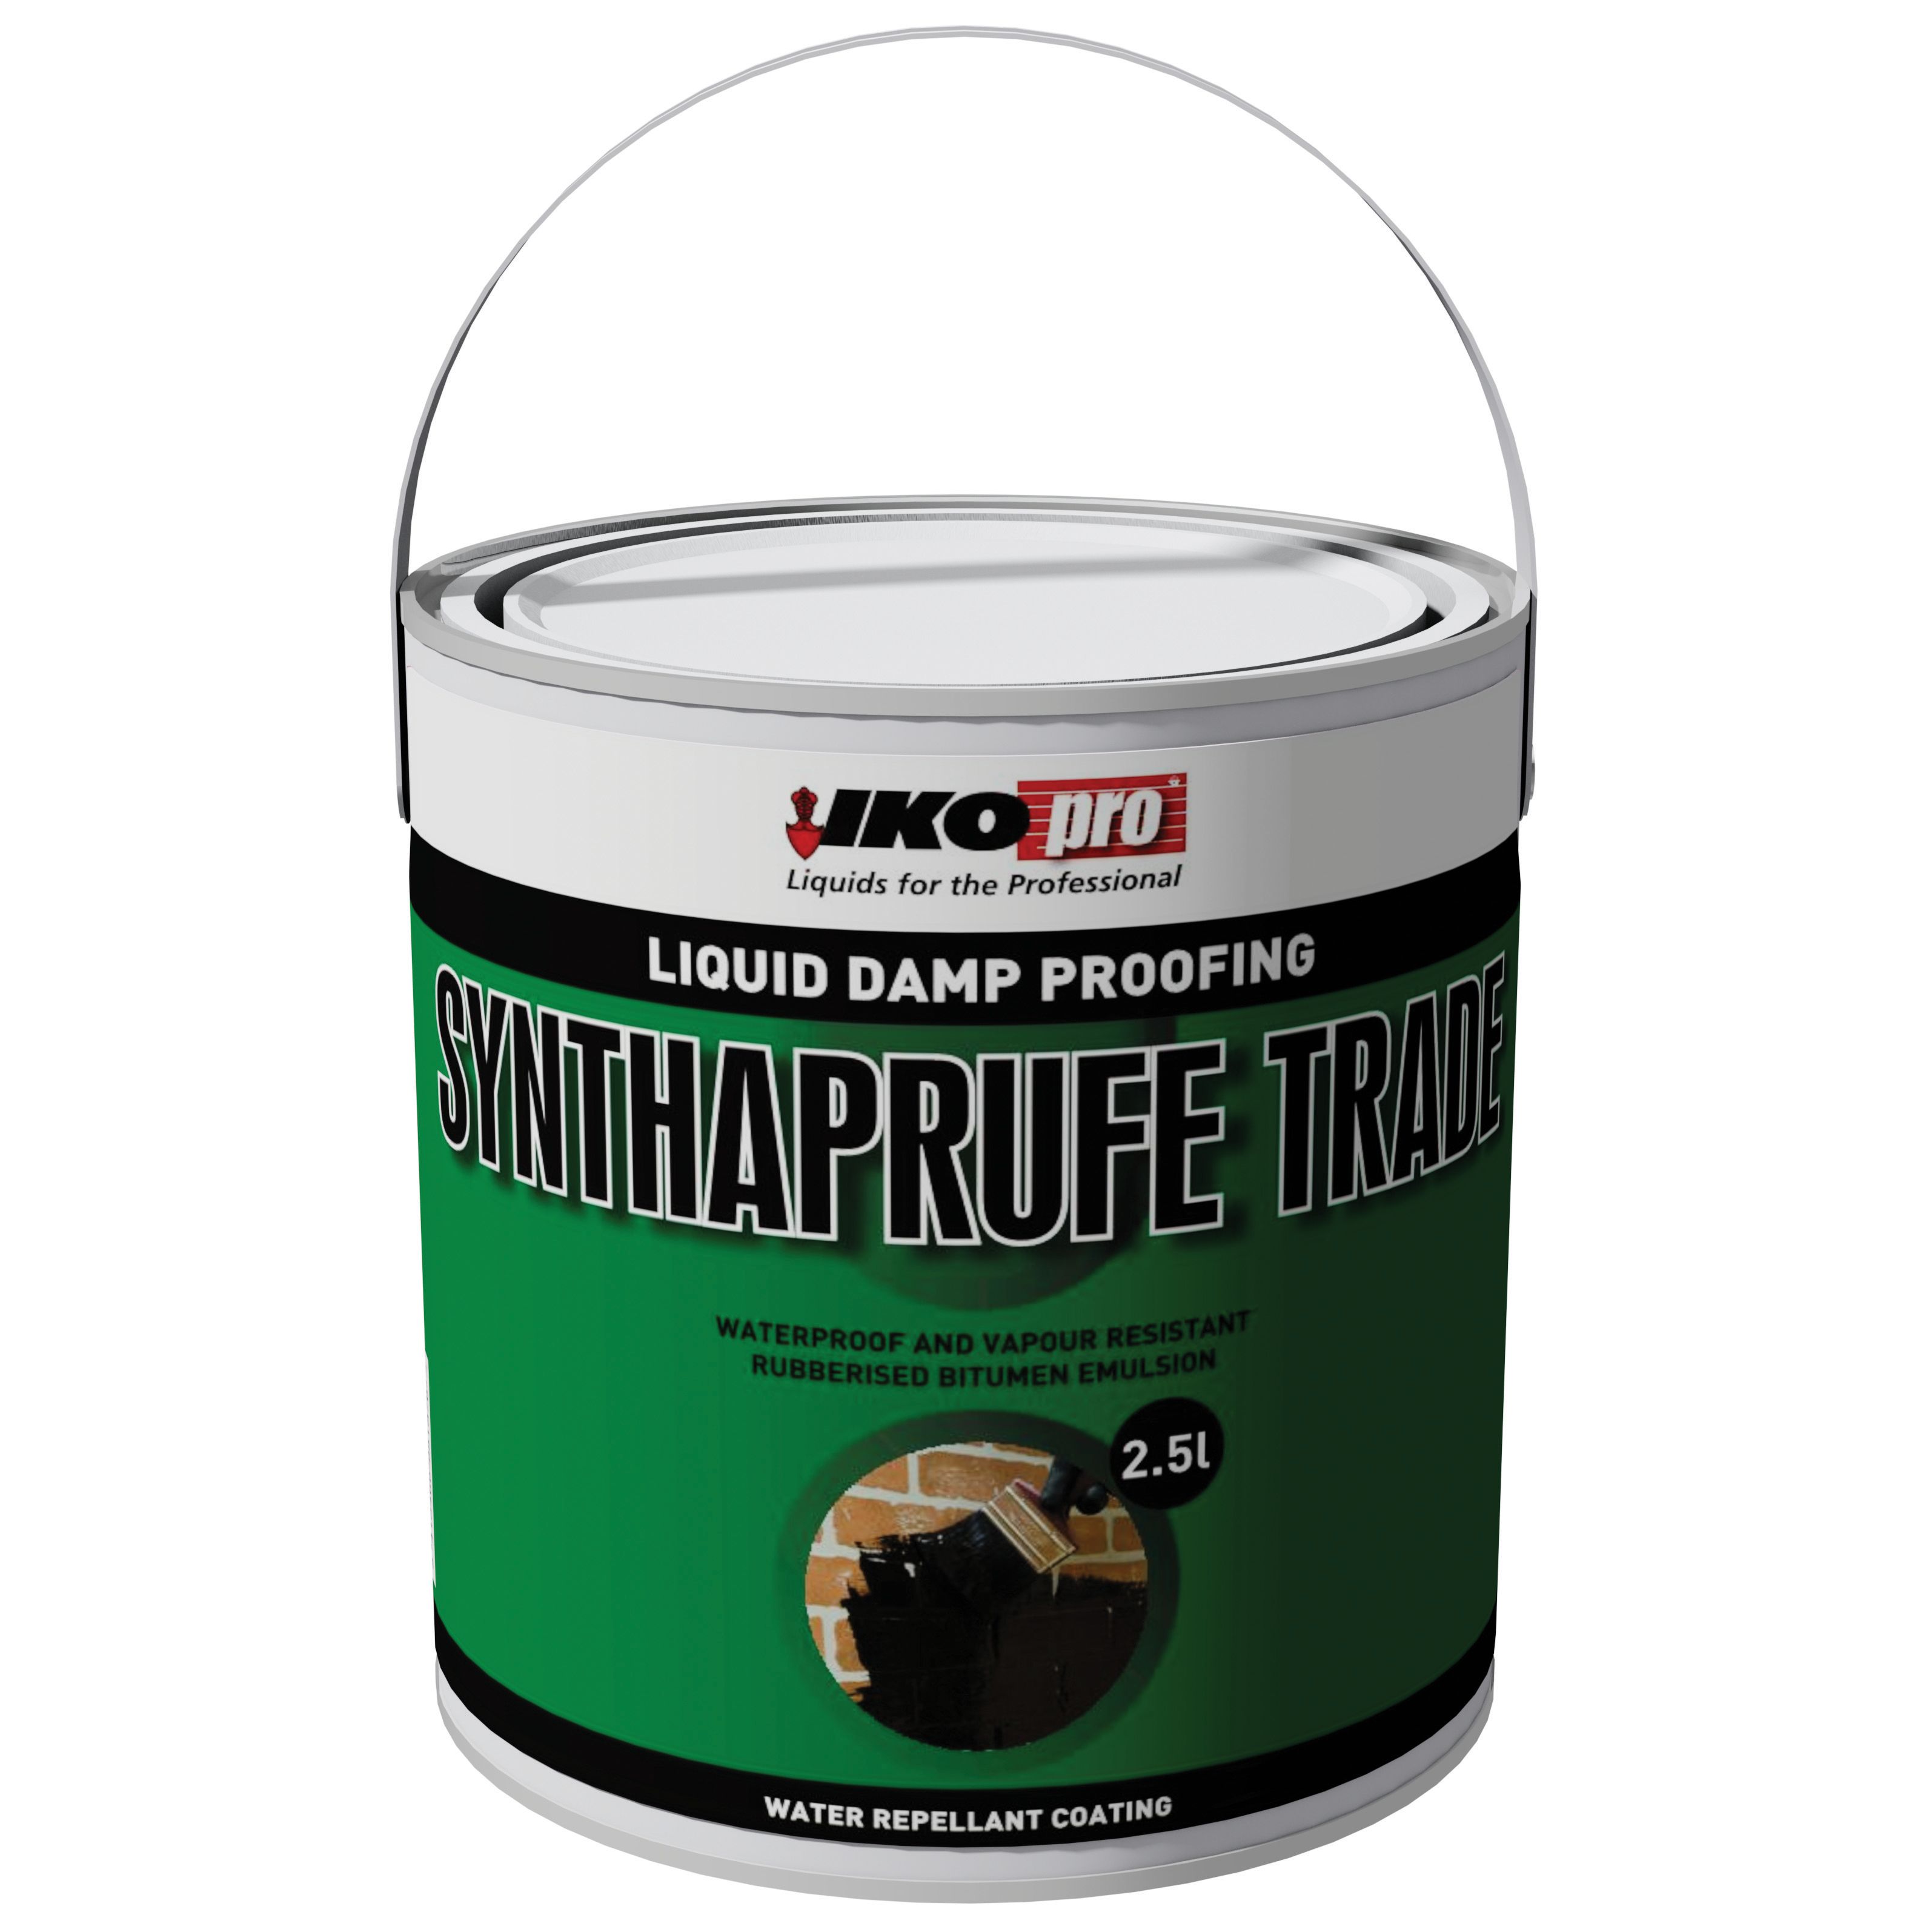 IKOpro Synthaprufe Trade Damp Proofing Liquid - 2.5L